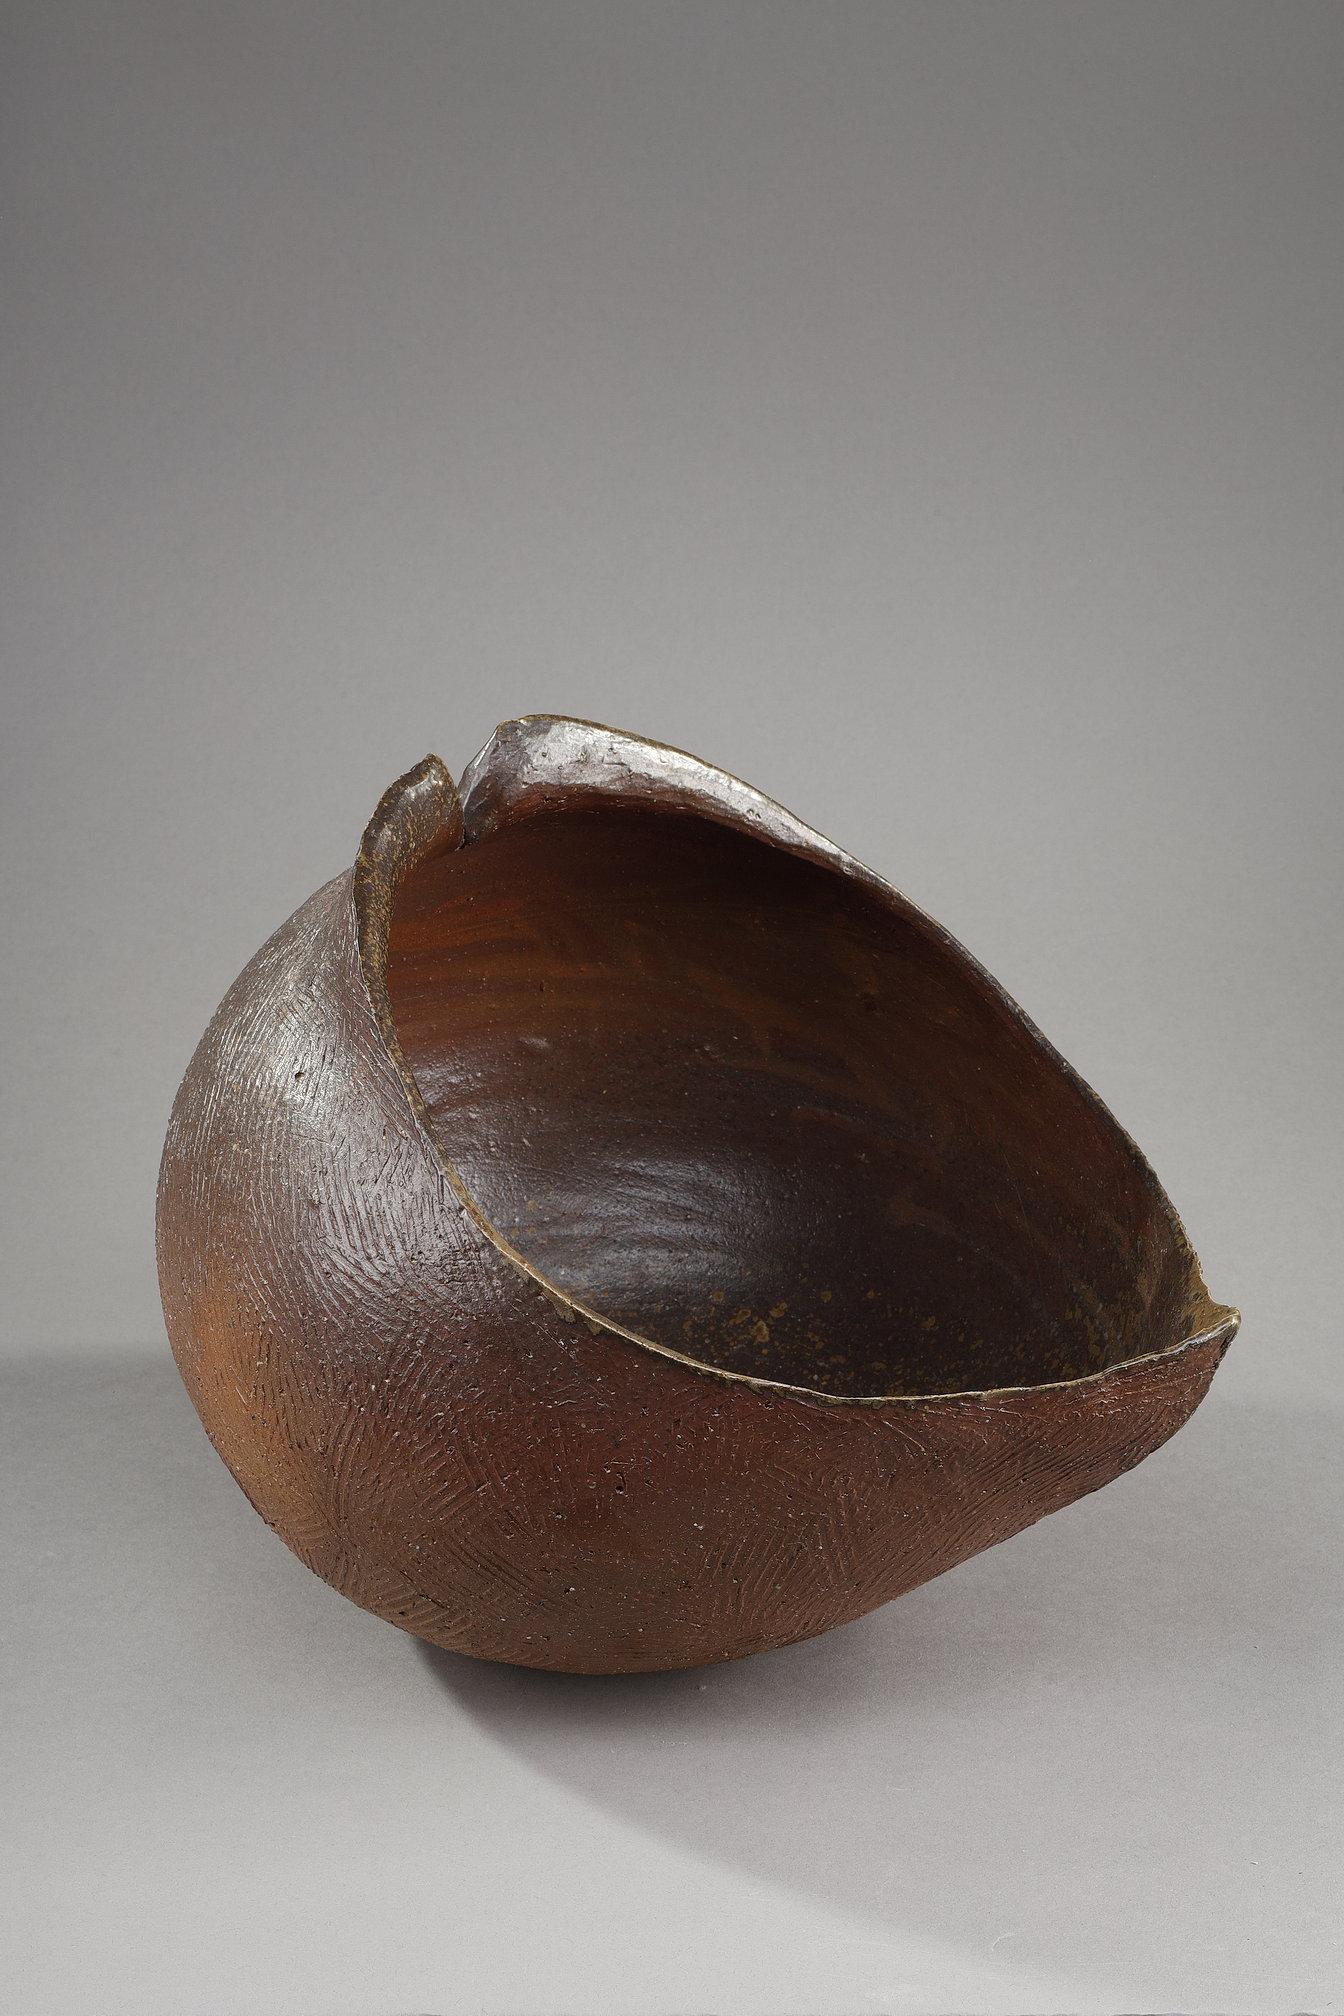 This work of art by master potter Mori Taïga demonstrates his mastery of the material and the art of fire. One can imagine a libatory cup to celebrate a divinity, or more prosaically, a bowl to cool off in on a summer's night. It's also an